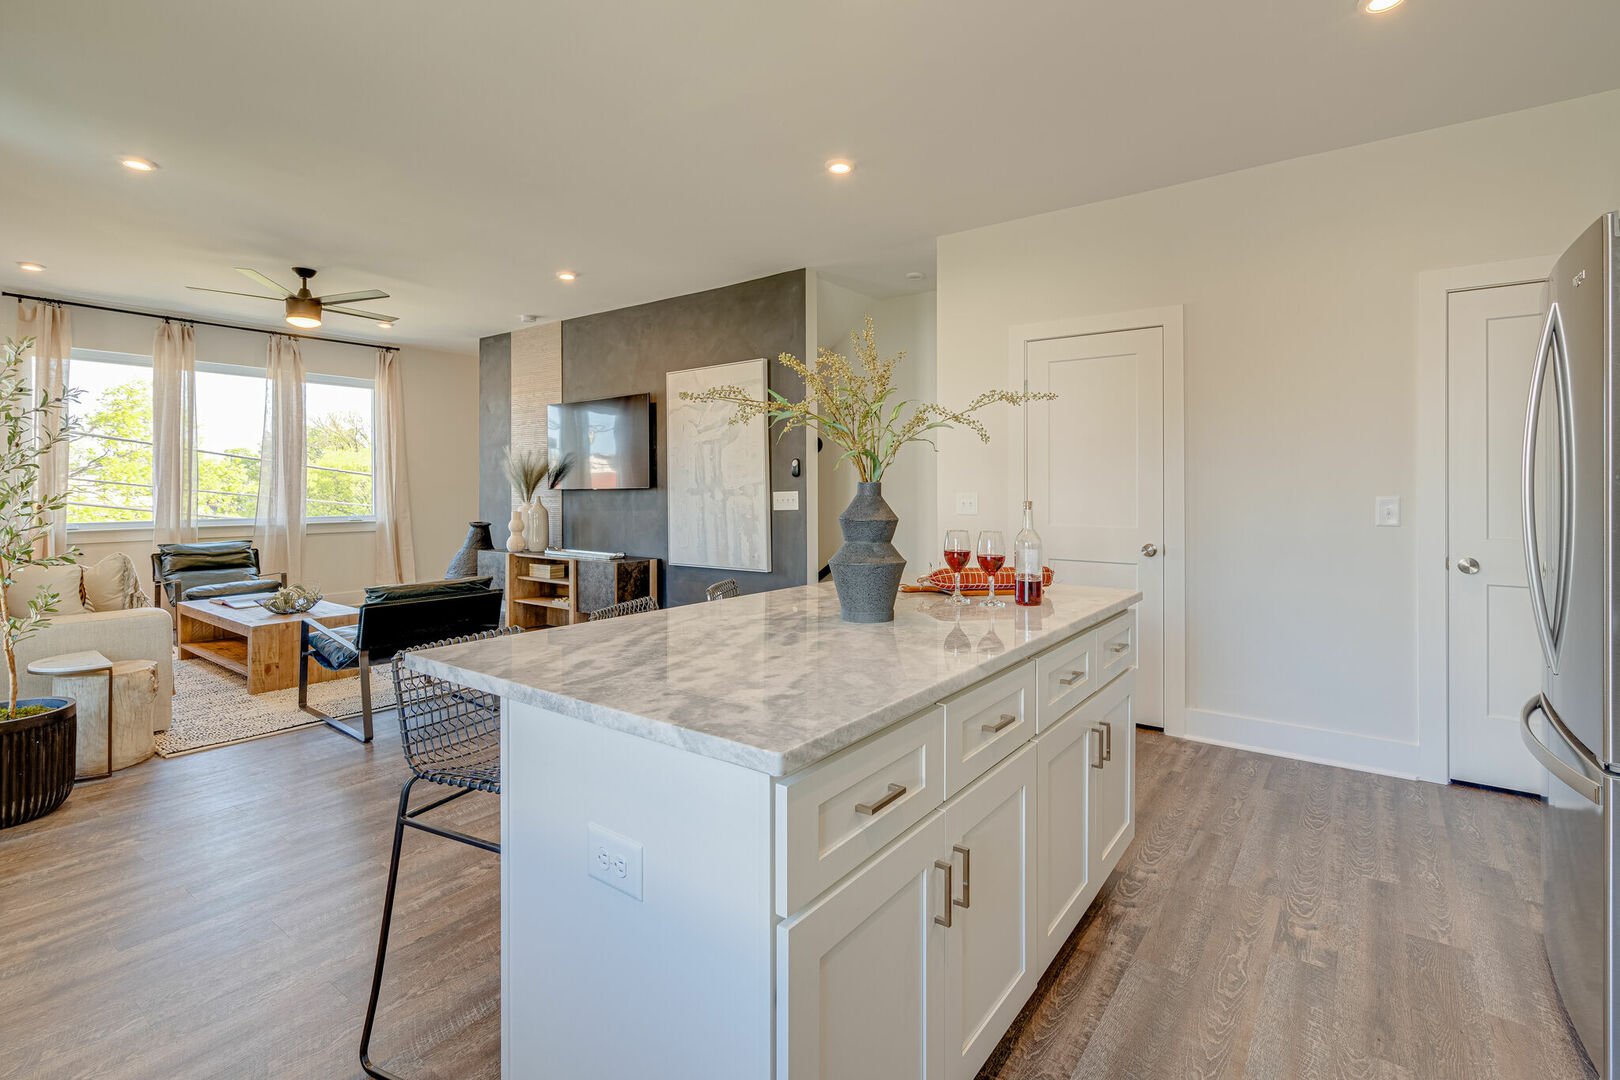 2nd Unit, 2nd Floor: Fully equipped kitchen stocked with basic cooking essentials and stainless steel appliances overlooking the designer furnished living room.